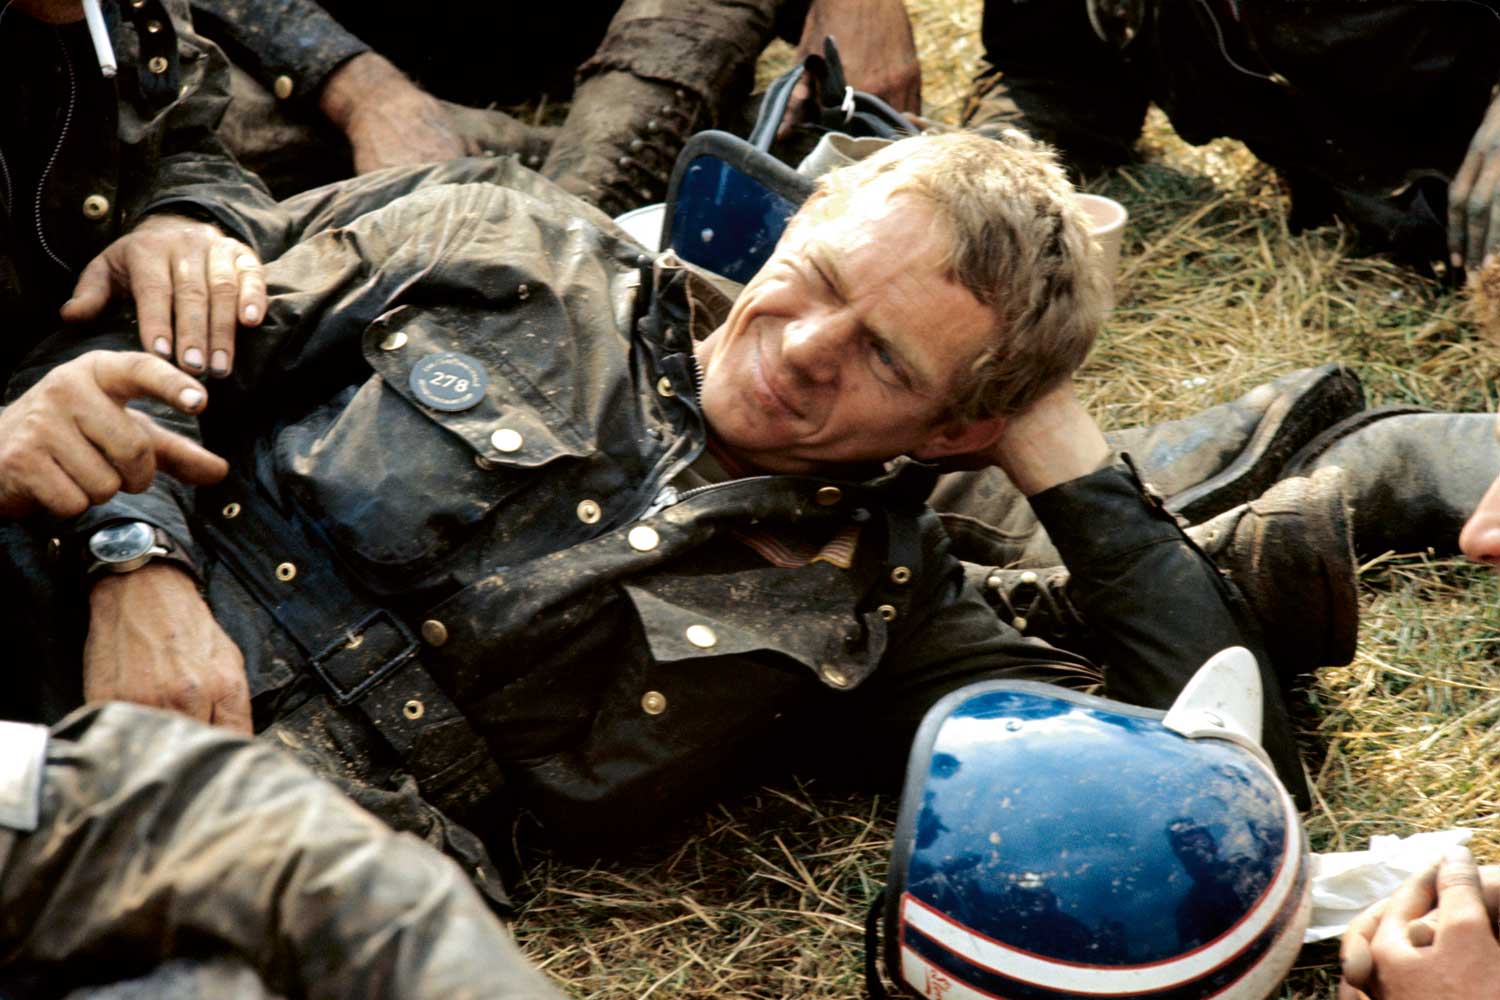 Steve McQueen resting after his run-out on the 1964 ISDT track. Each evening after the race (300km on average on terrible paths), the runners used to collapse on the grass, covered in mud and oil. Visible on his wrist is the Hanhart 417 ES (Photo by François Gragnon / Paris Match via Getty Images)